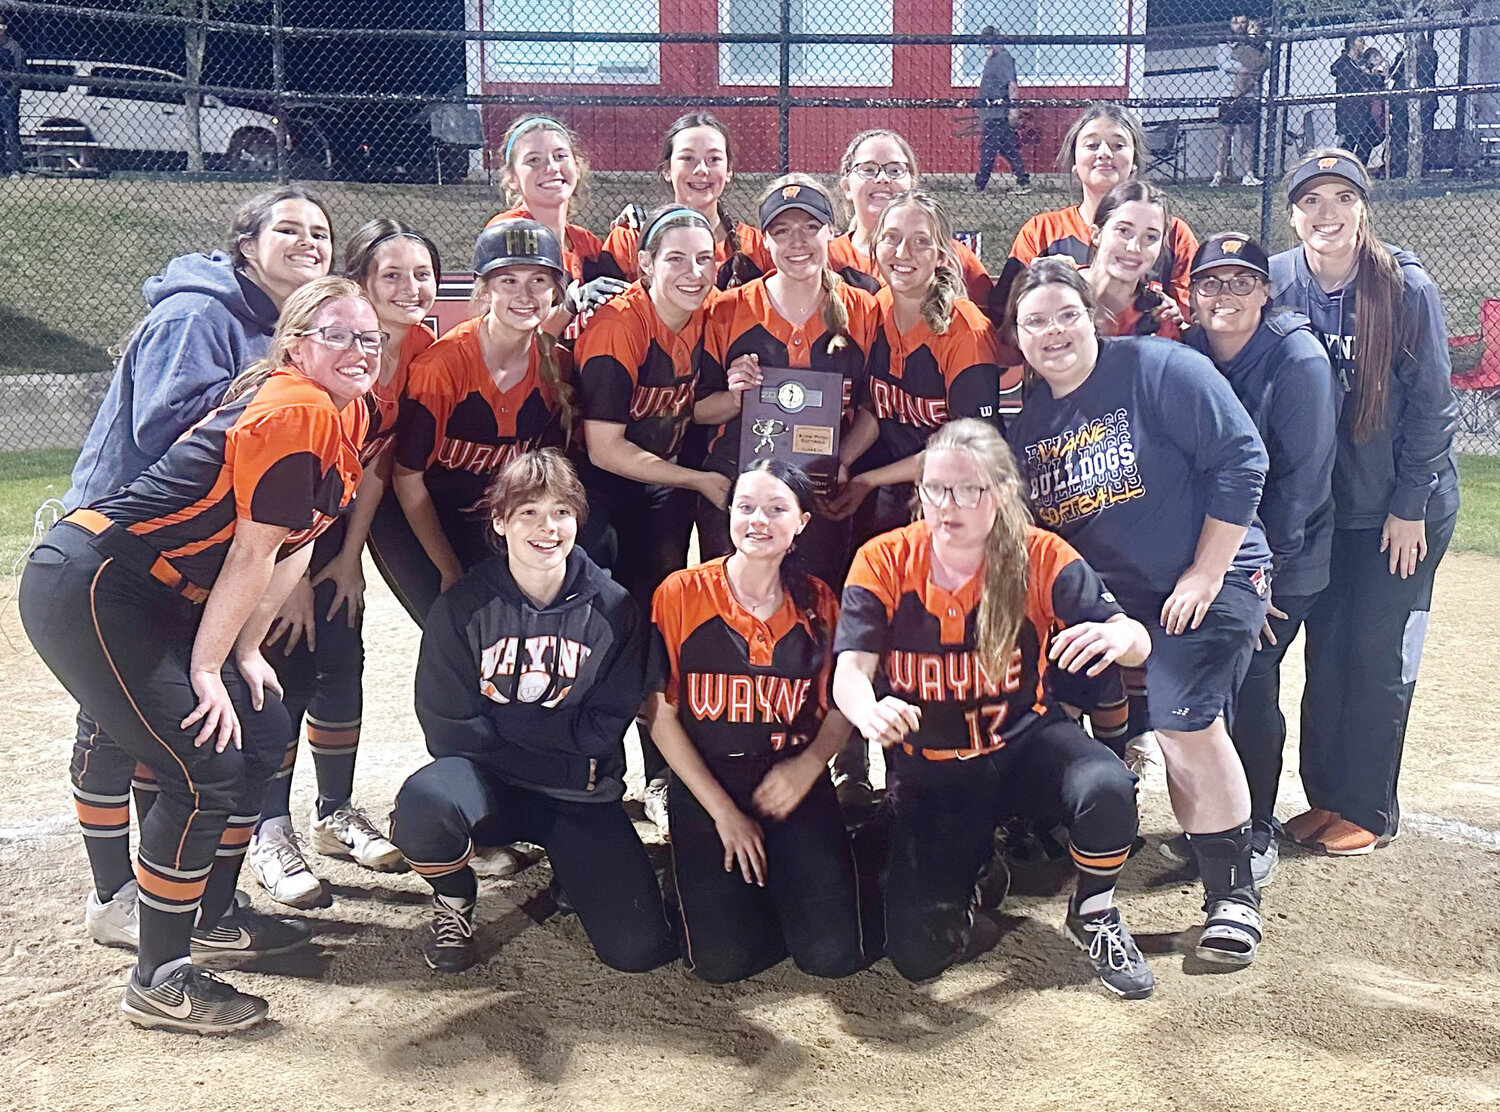 The Wayne slow-pitch softball team won the District championship after they defeated Stratford 9-8 in the if-necessary game of the District tournament last Thursday. They are in Dale for the Regional tournament starting Thursday, weather permitting.